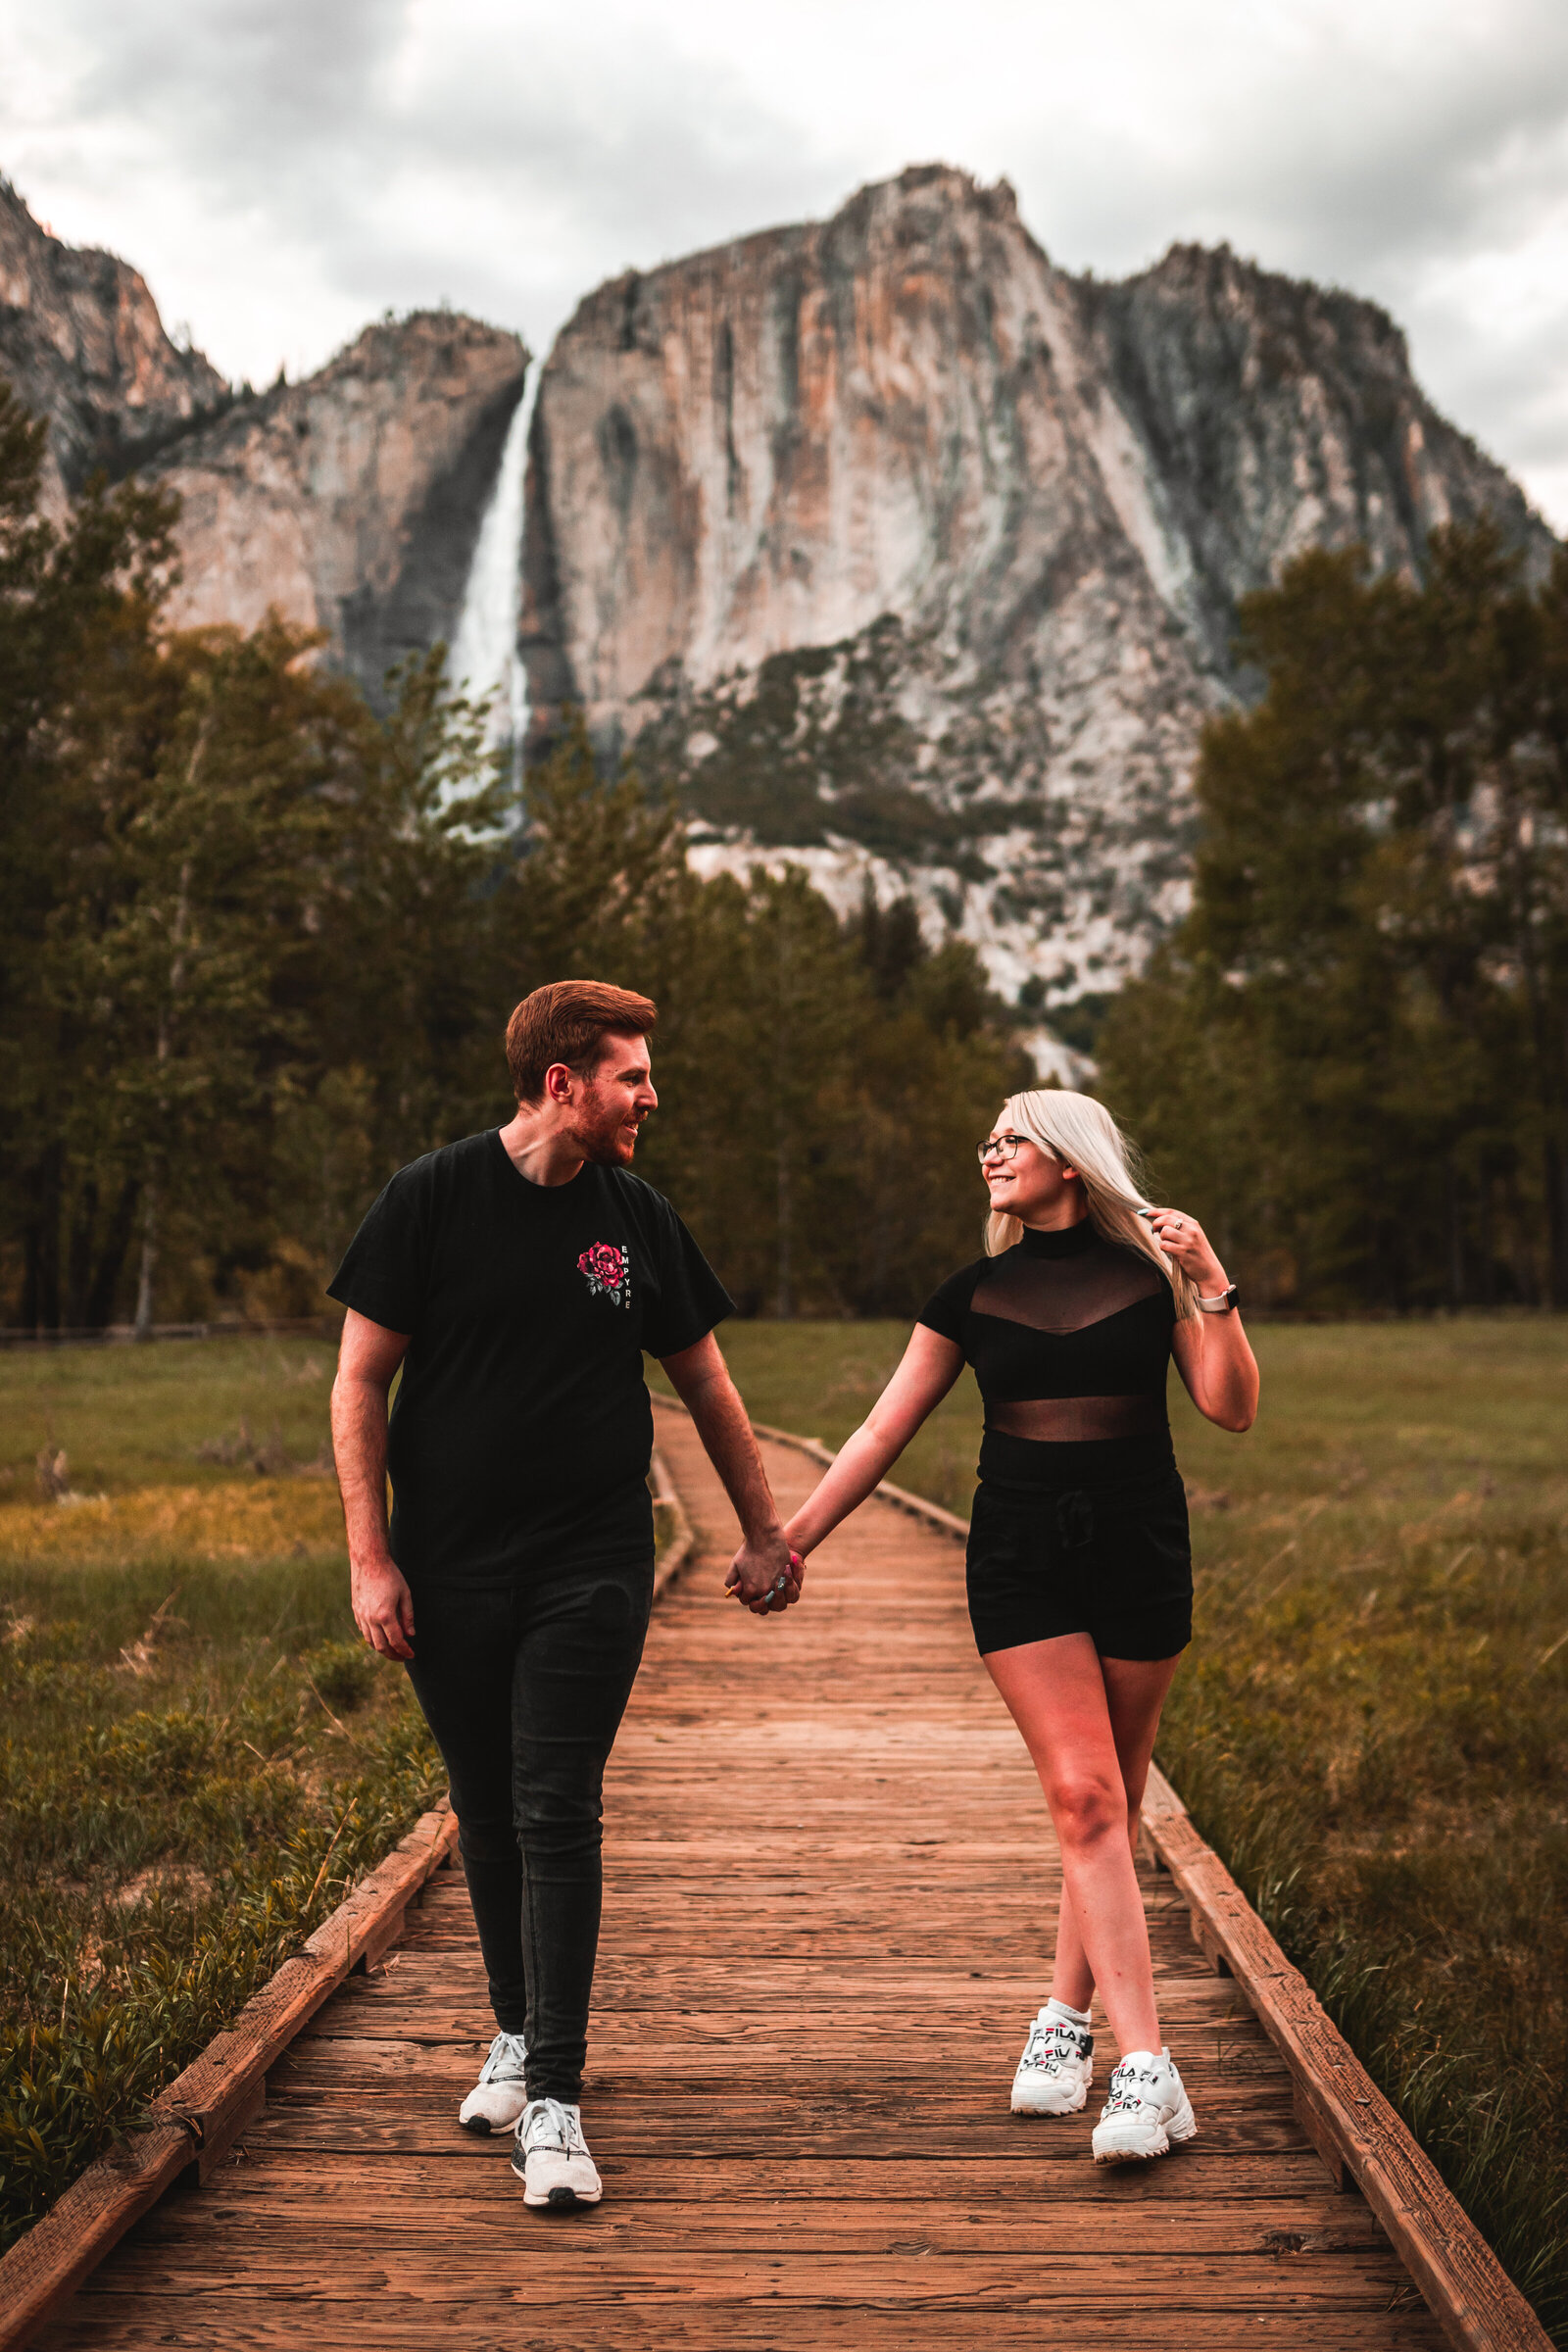 Couple walking down a path holding hands, with a beautiful forest and waterfall behind them.